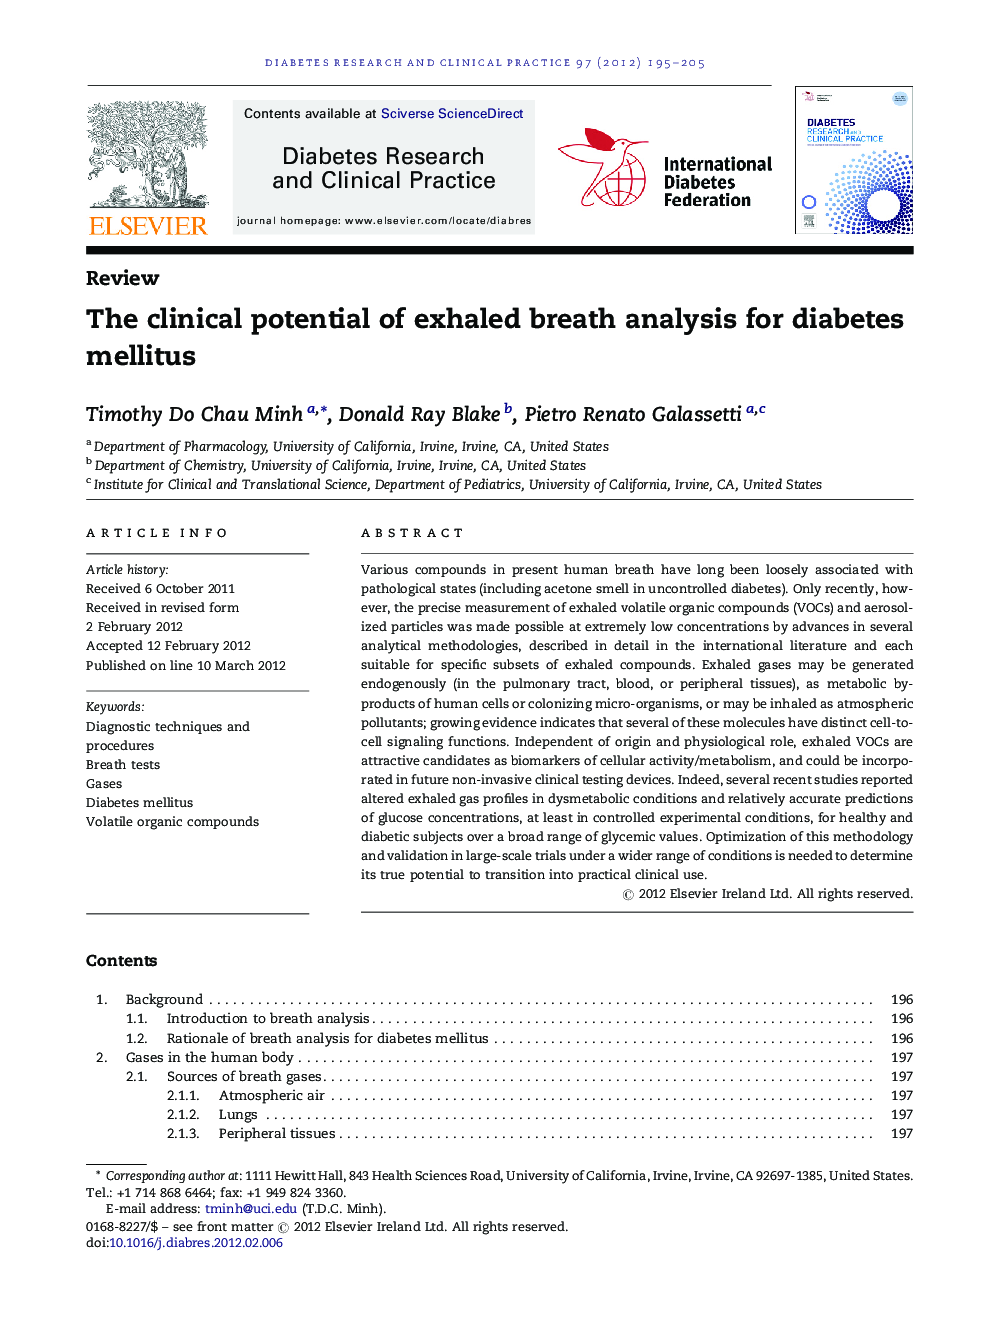 The clinical potential of exhaled breath analysis for diabetes mellitus